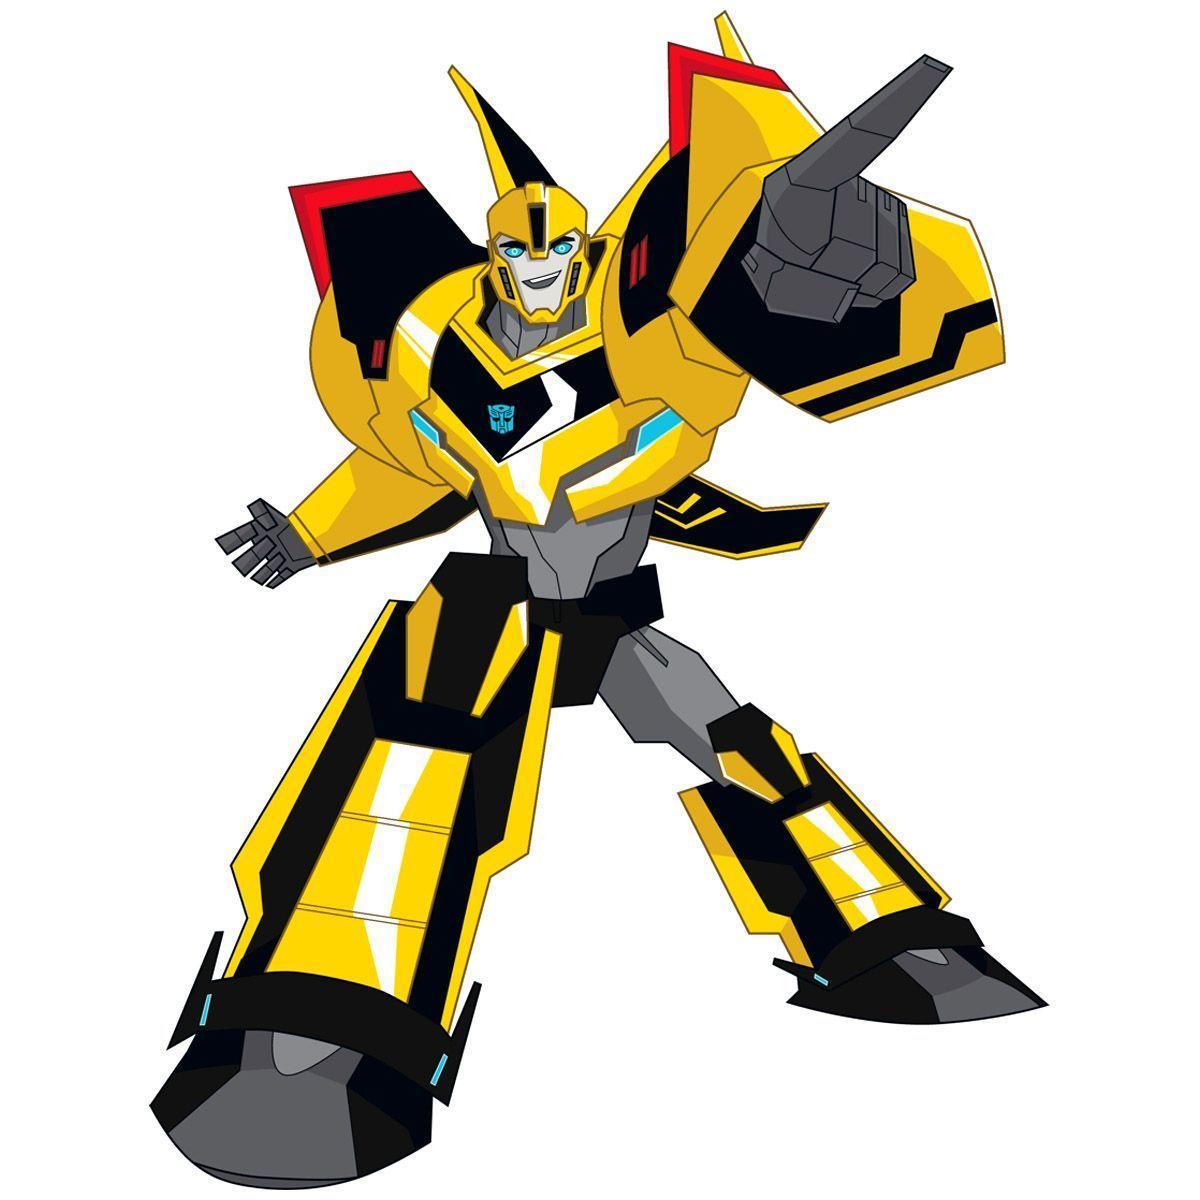 New Transformers Cartoon Revealed Look at Bumblebee